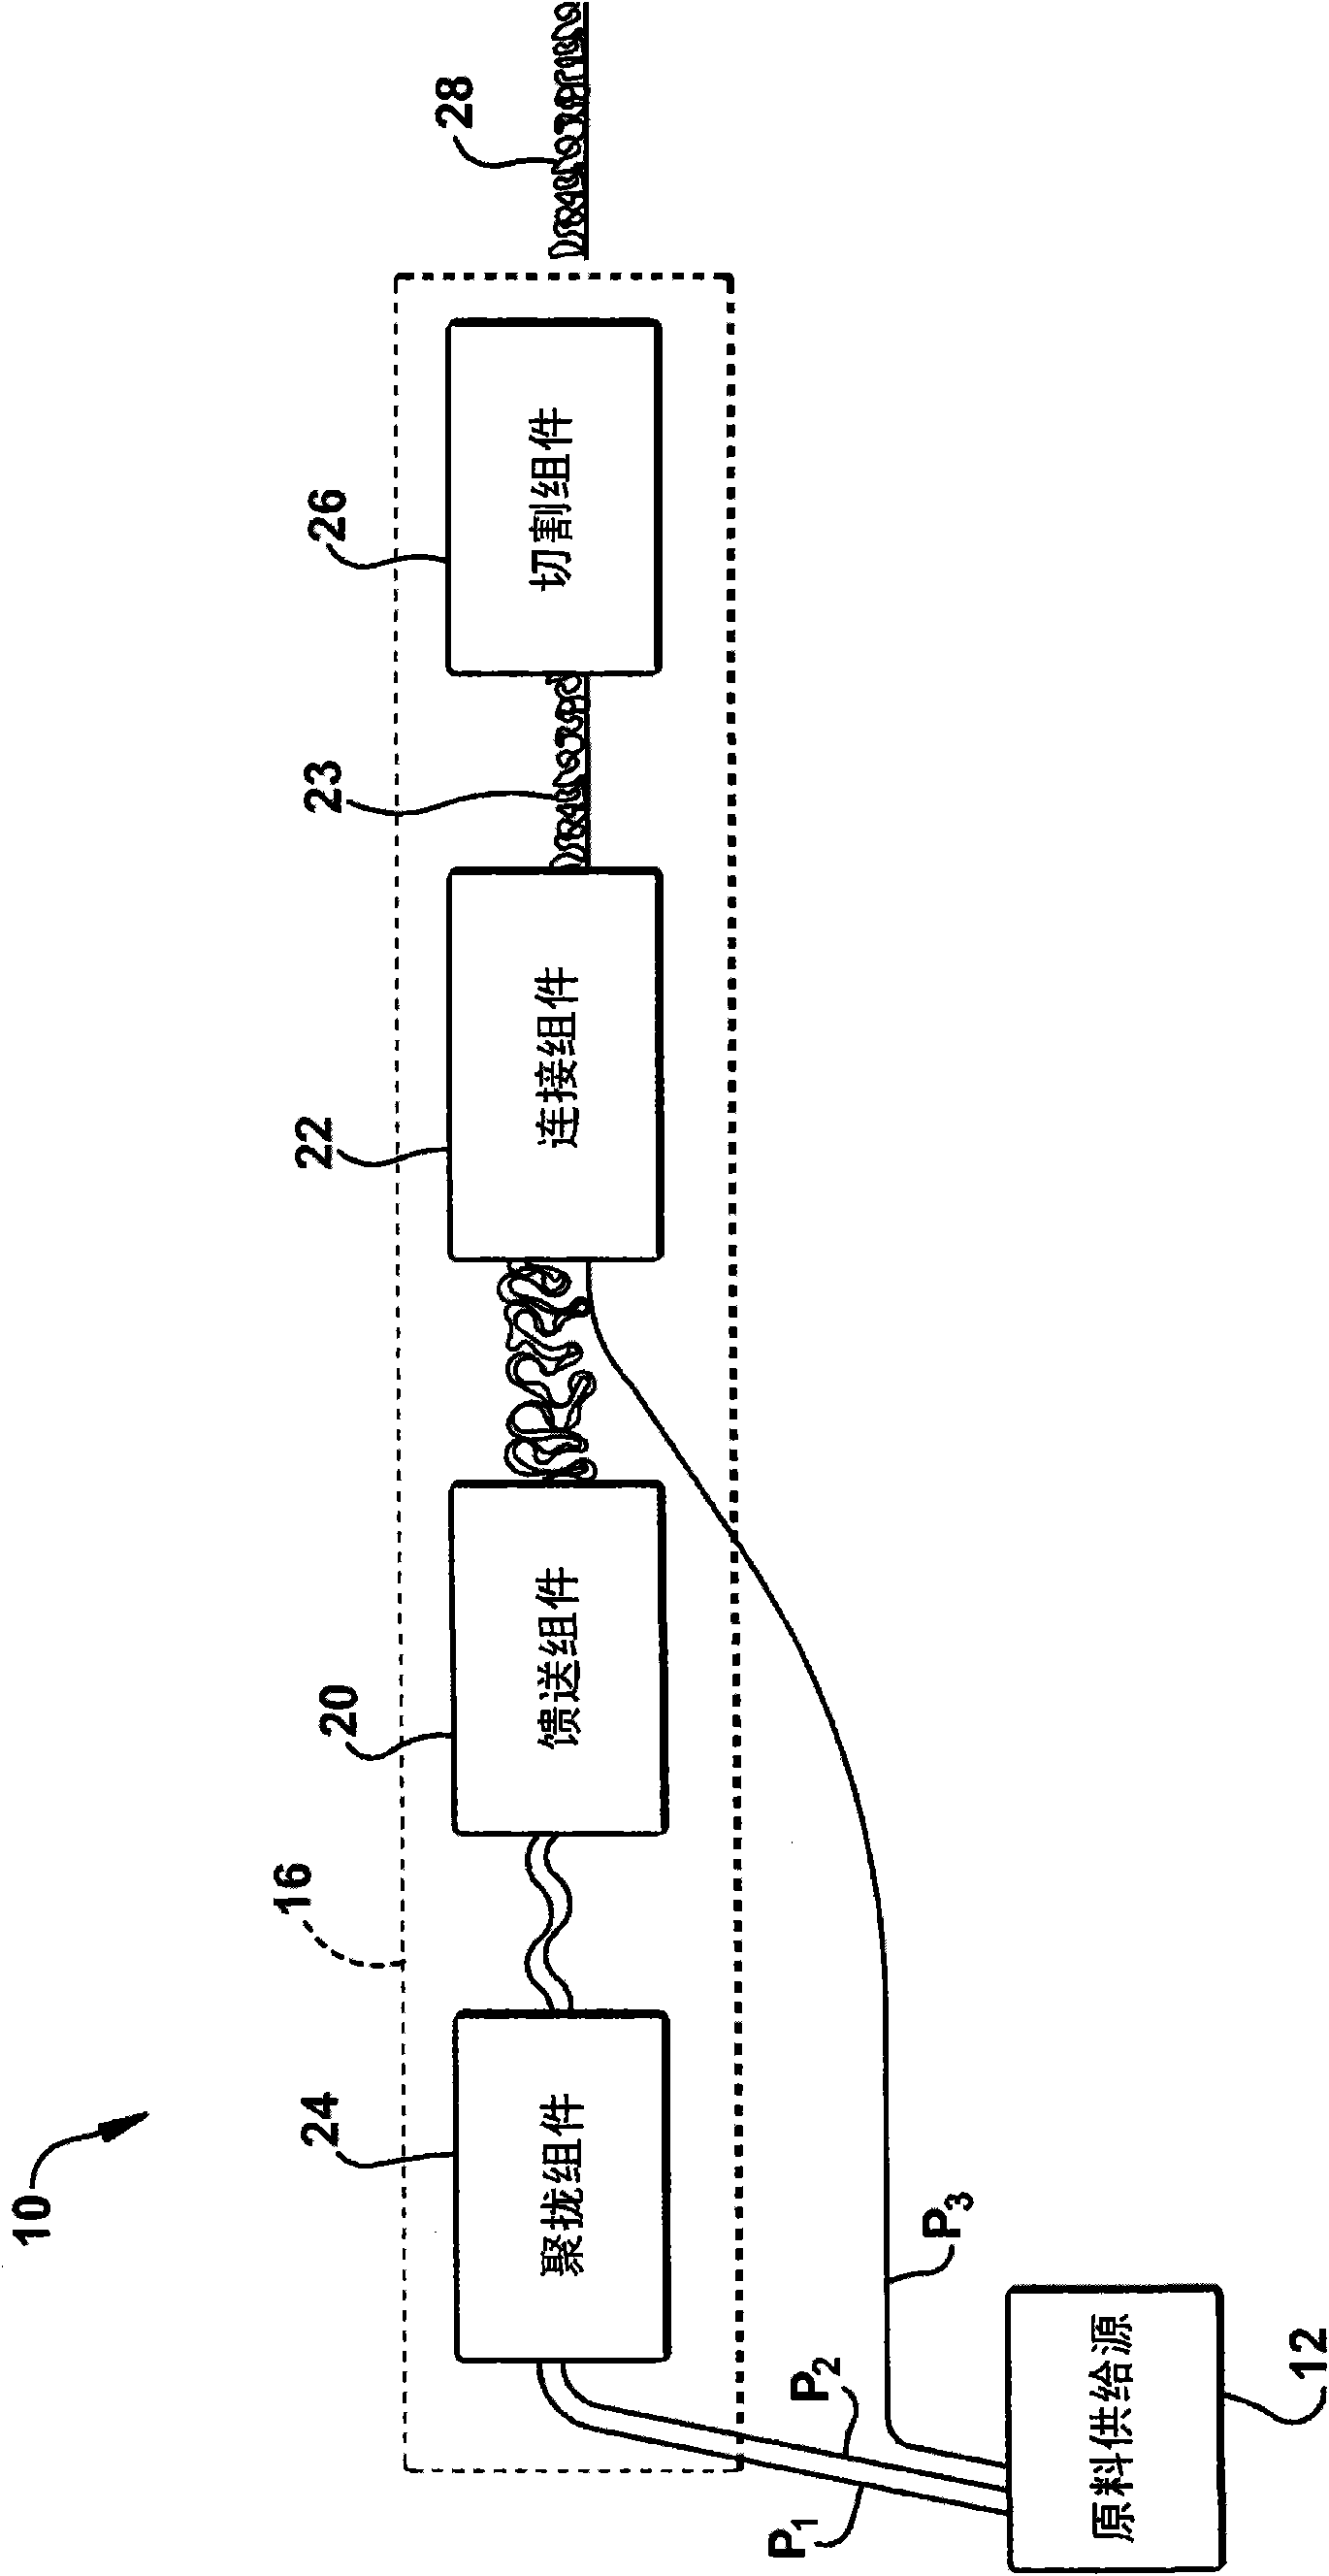 Dunnage conversion machine and method